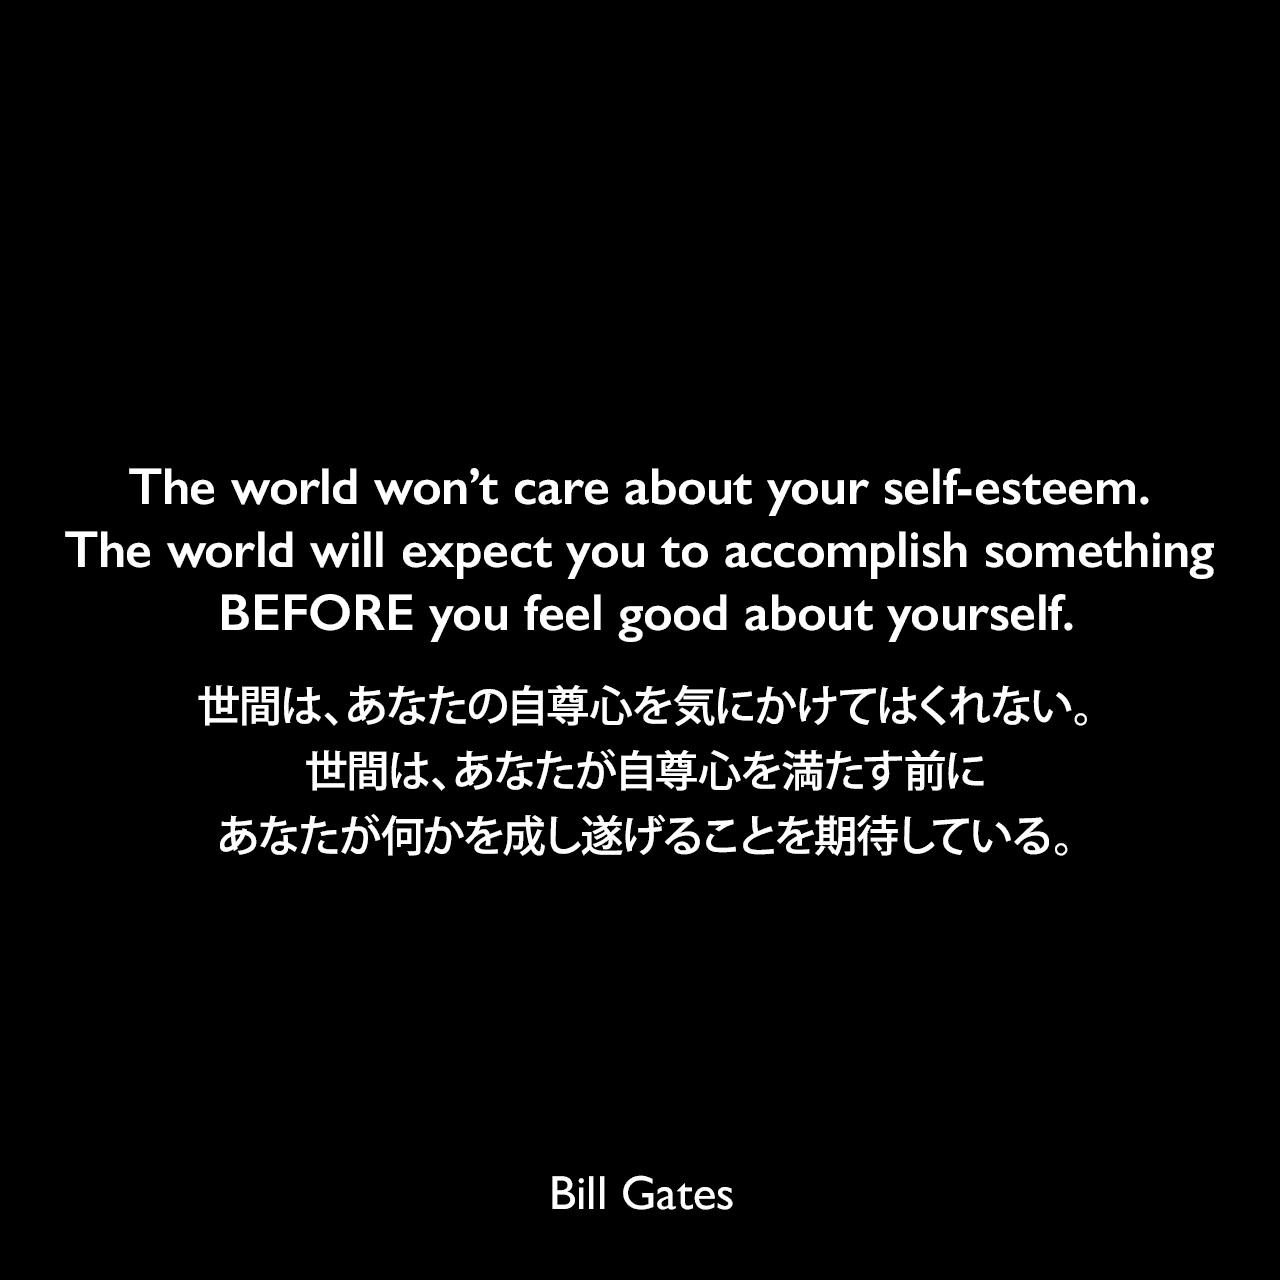 The world won’t care about your self-esteem. The world will expect you to accomplish something BEFORE you feel good about yourself.世間は、あなたの自尊心を気にかけてはくれない。世間は、あなたが自尊心を満たす前に、あなたが何かを成し遂げることを期待している。Bill Gates